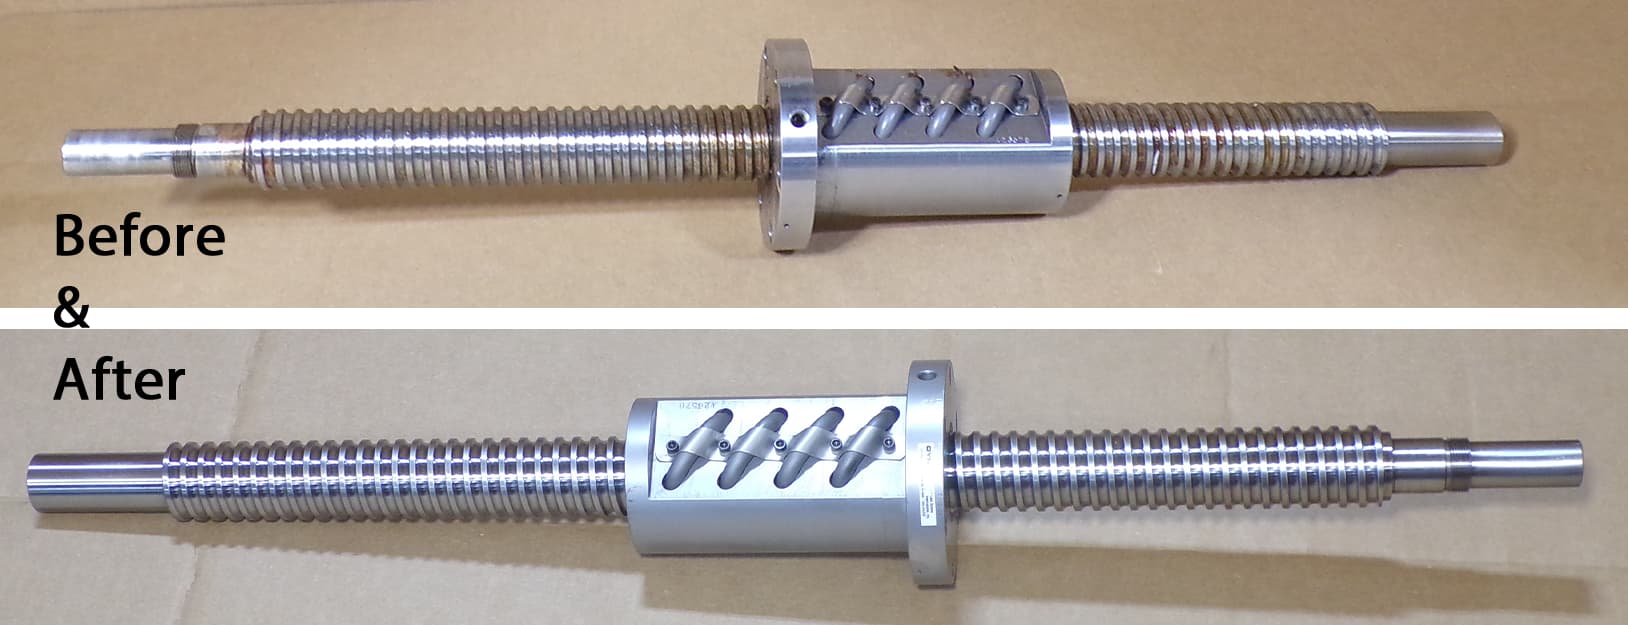 Before and after image showing the repair of a ball screw. 